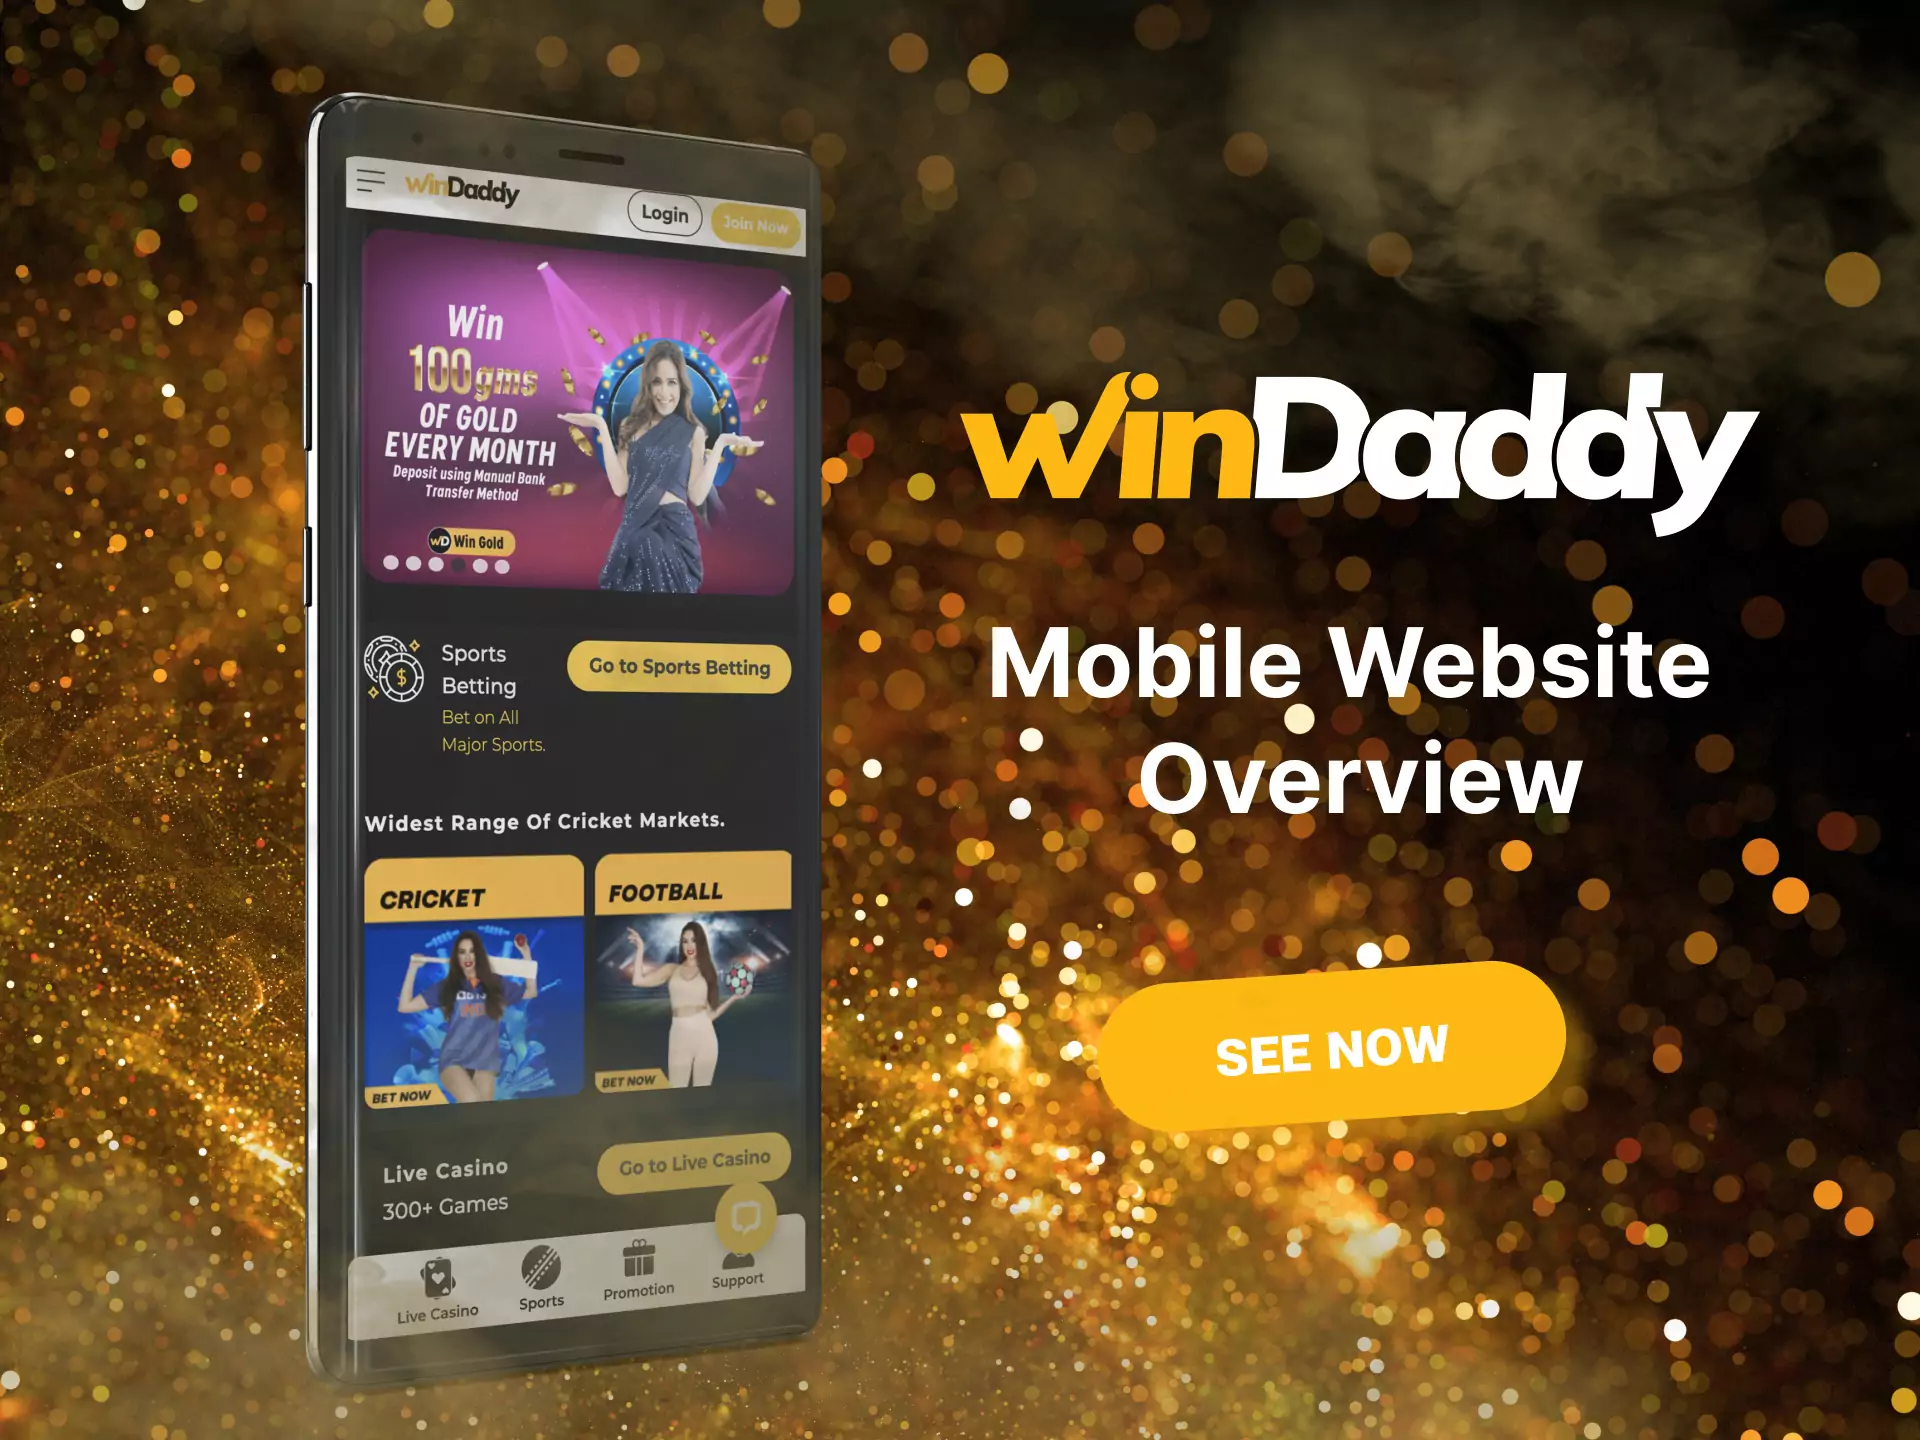 Use Windaddy's simple interface to enjoy the game more.